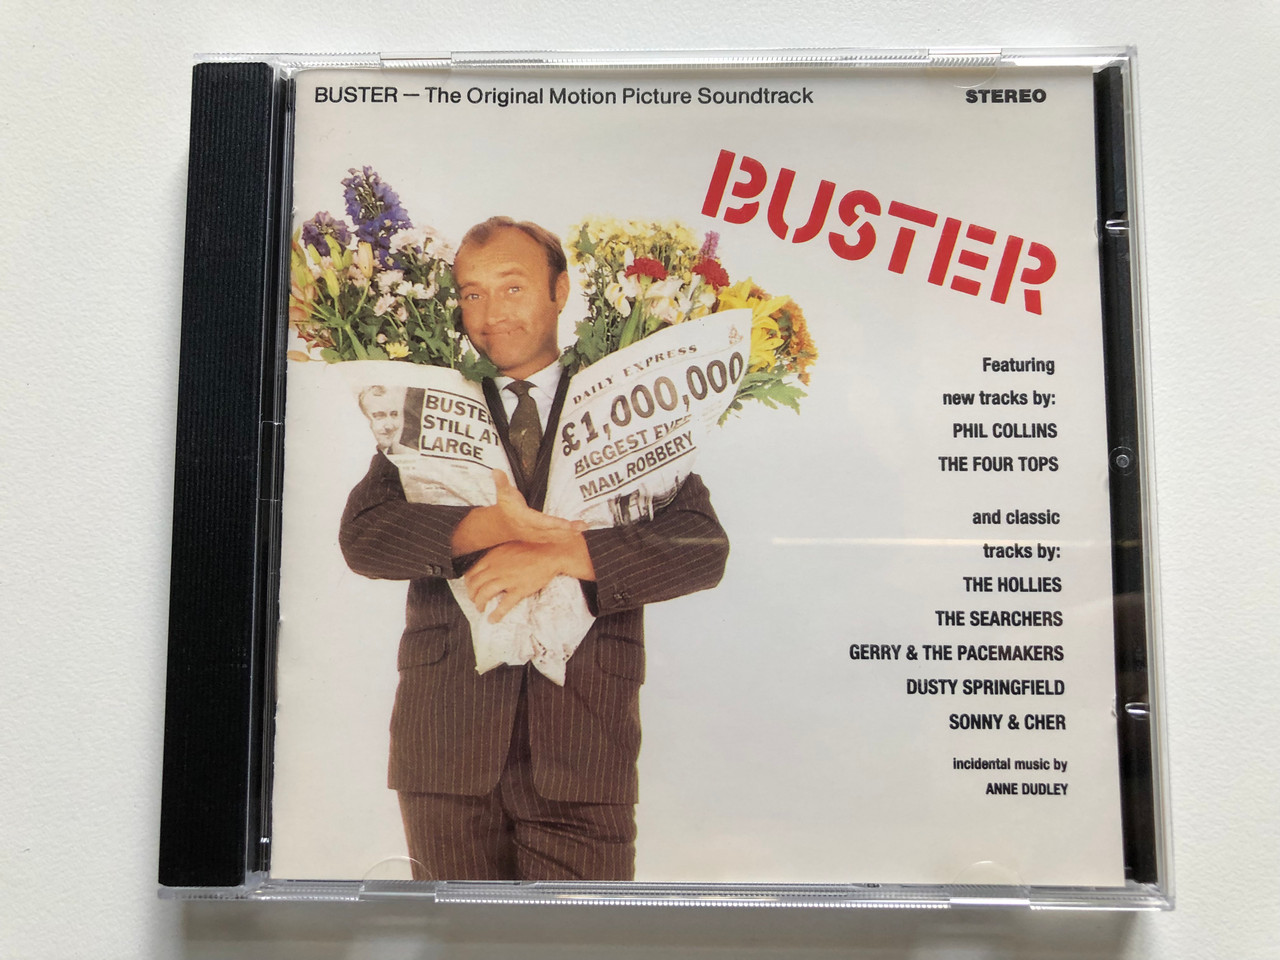 https://cdn10.bigcommerce.com/s-62bdpkt7pb/products/0/images/242240/Buster_The_Original_Motion_Picture_Soundtrack_Featuring_new_tracks_by_Phil_Collins_The_Four_Tops_and_classic_tracks_by_The_Hollies_The_Searchers_Gerry_And_The_Pacemakers_Dusty_Spring_1__86192.1658741682.1280.1280.JPG?c=2&_gl=1*1svvb6m*_ga*MjA2NTIxMjE2MC4xNTkwNTEyNTMy*_ga_WS2VZYPC6G*MTY1ODczMDA4My40OTYuMS4xNjU4NzQxMzkxLjEy